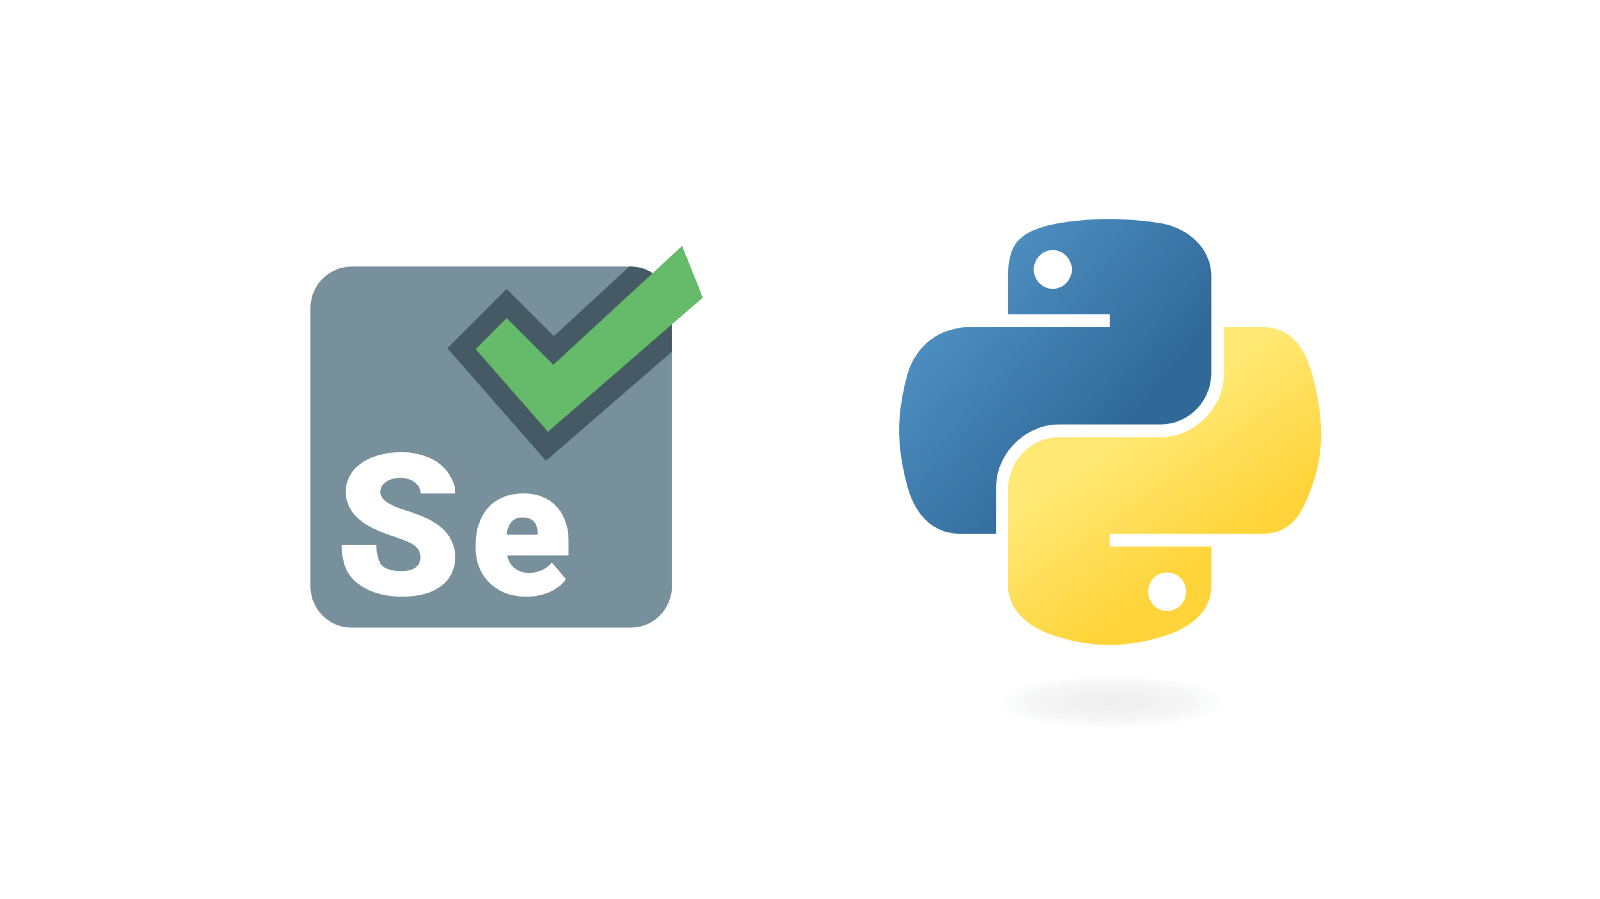 The selenium and python logos next to each other.